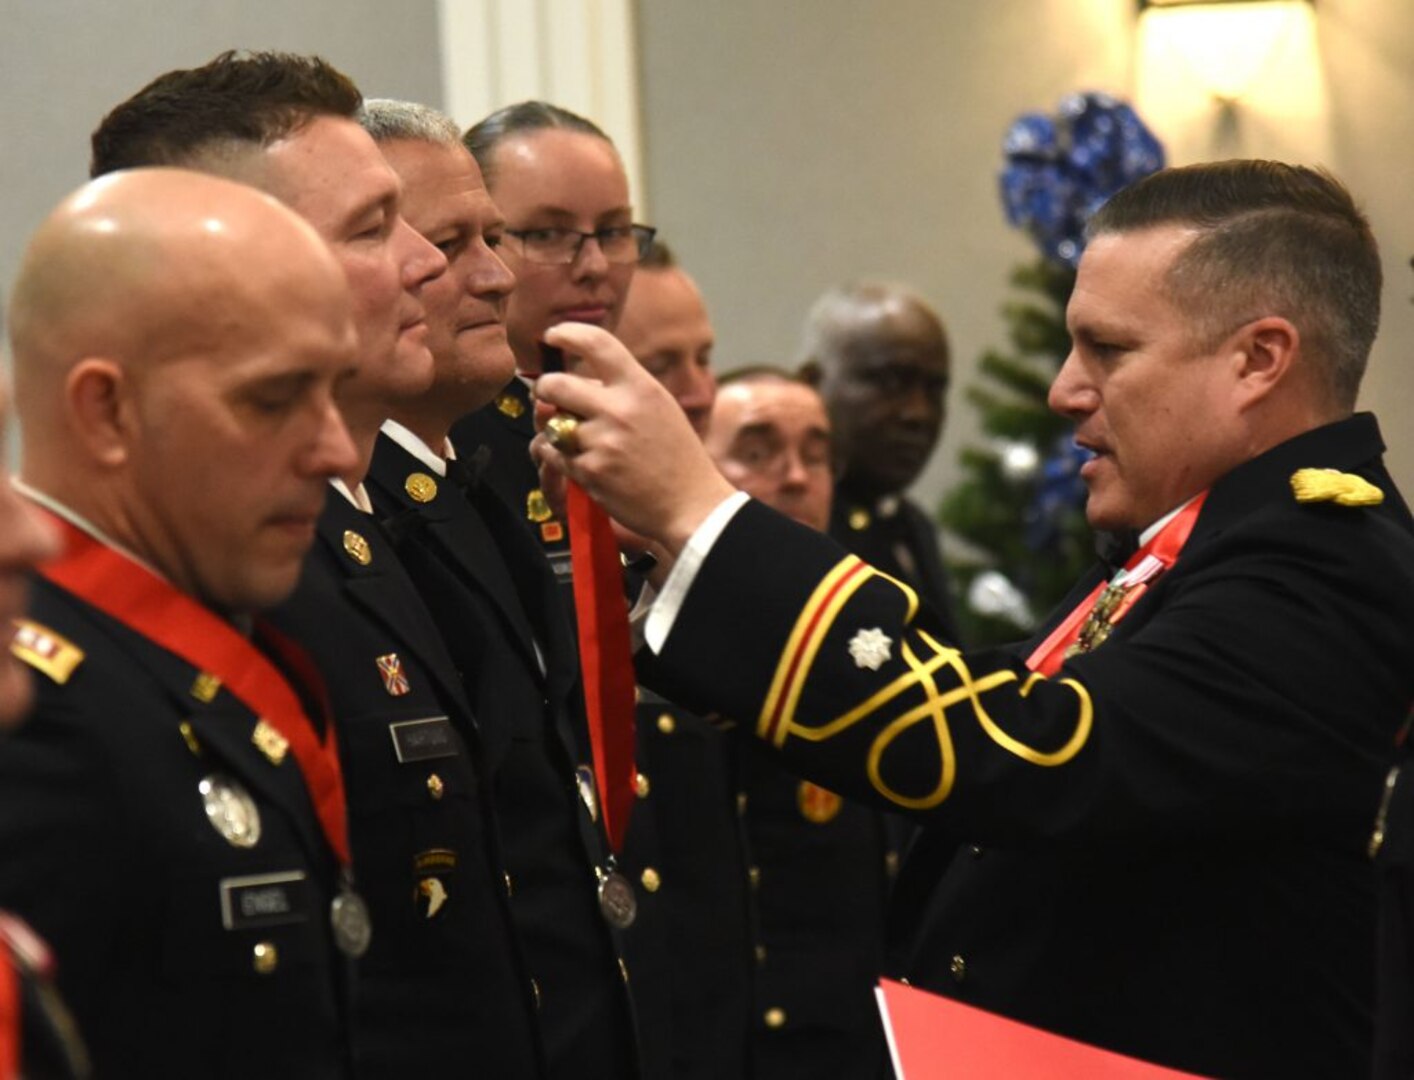 Thunder Soldiers honored with Order of Saint Barbara